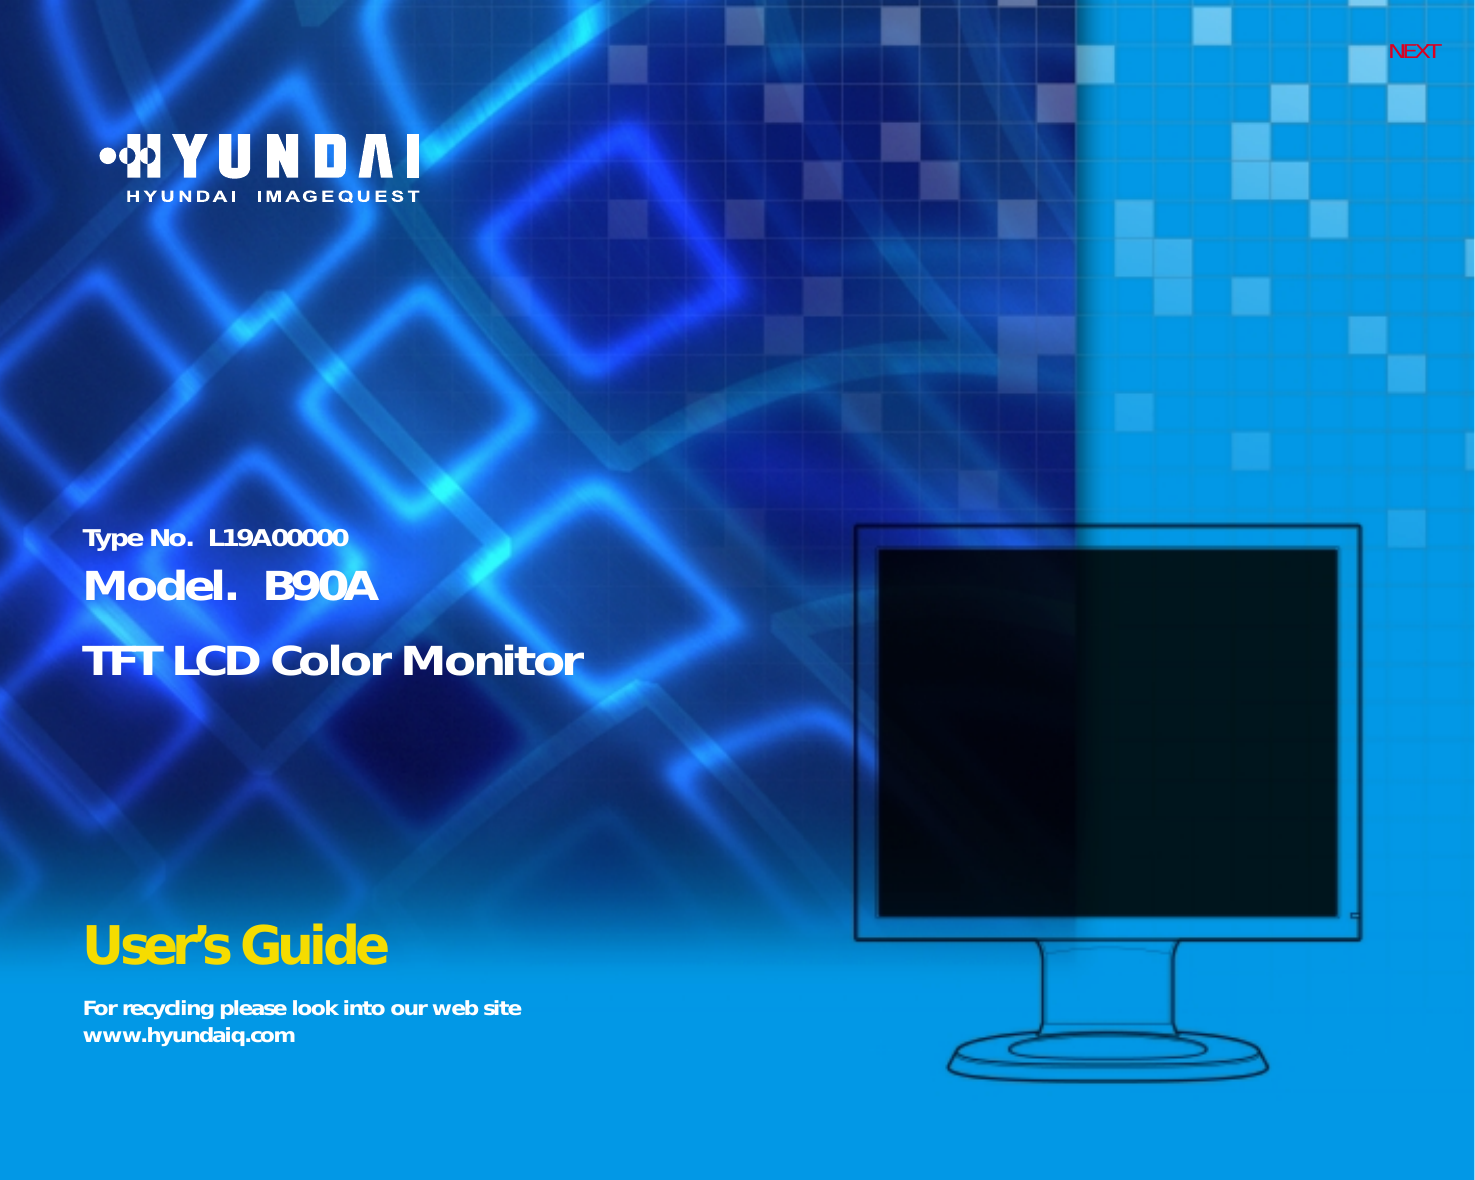 NEXTFor recycling please look into our web site www.hyundaiq.comUser’s GuideType No.  L19A00000 Model.  B90ATFT LCD Color Monitor